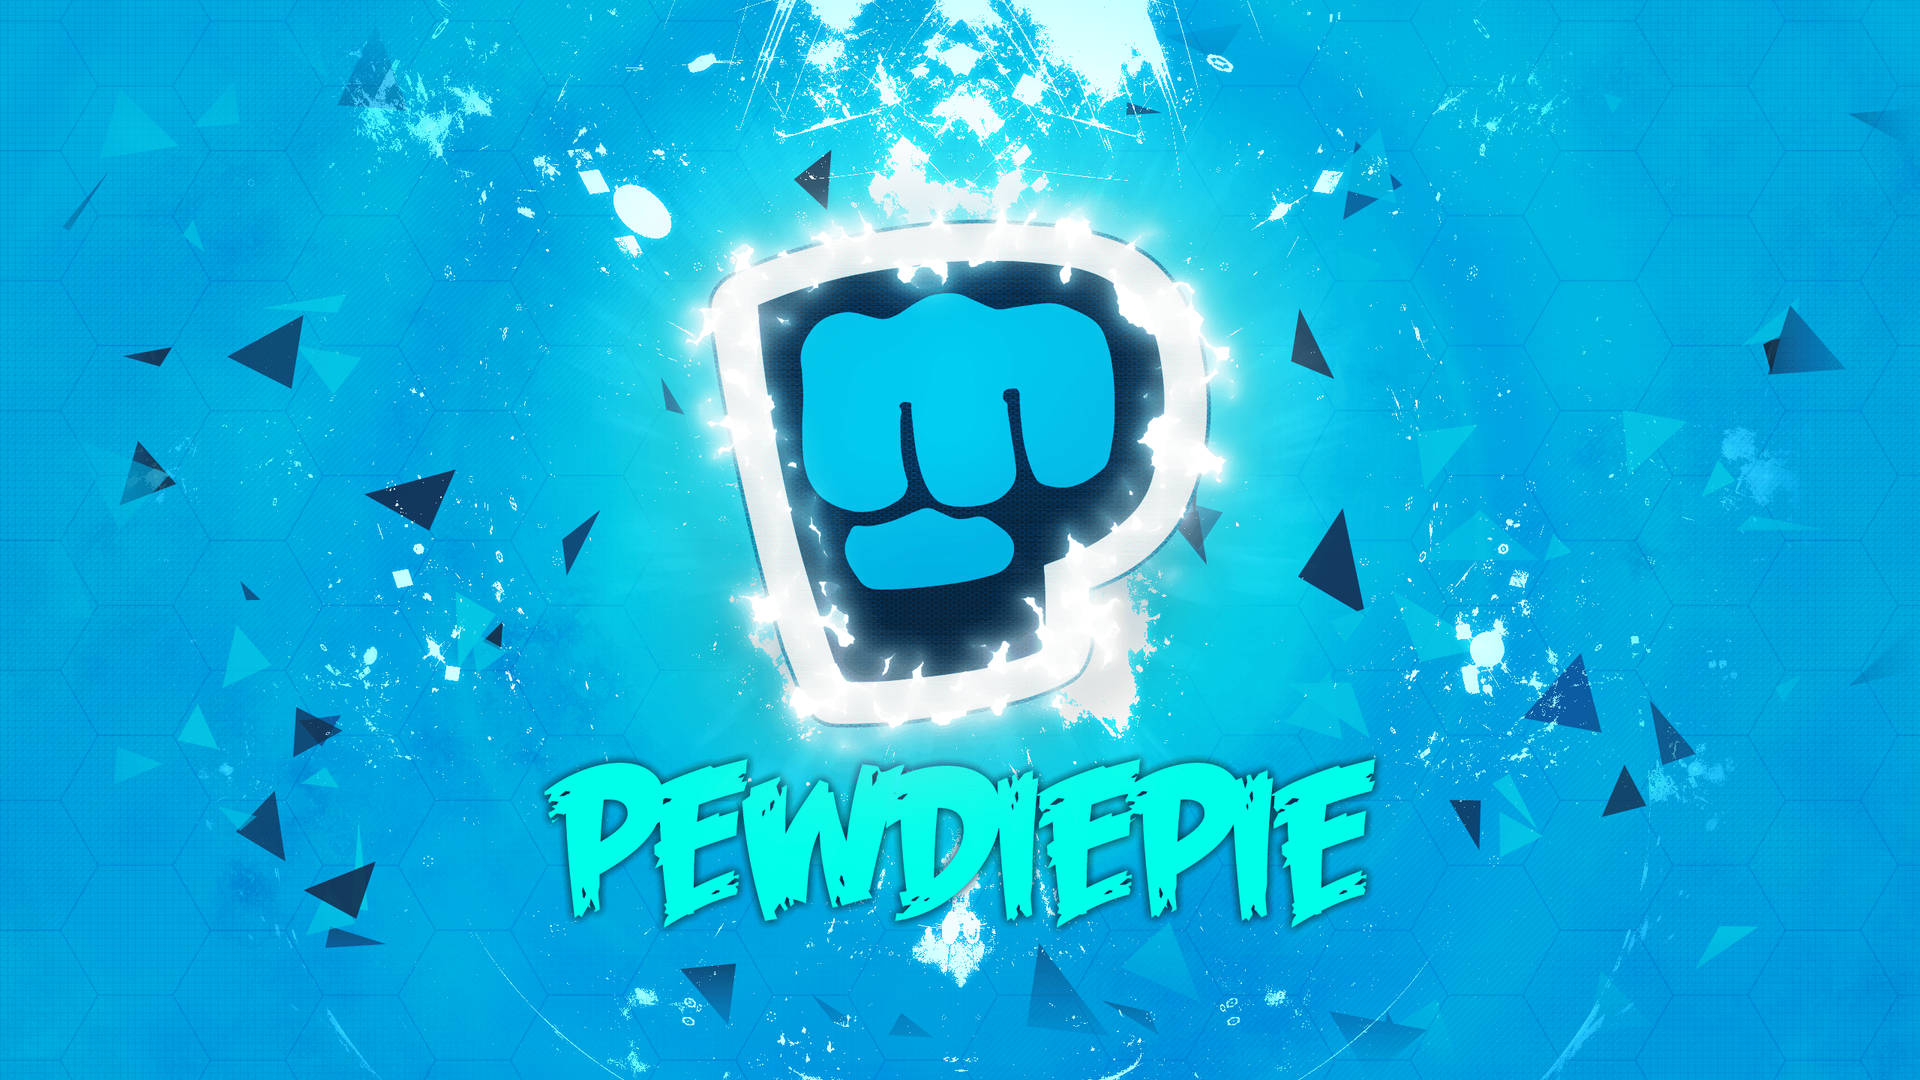 Think Positively and Let The Glowing Brofist Lead You Wallpaper